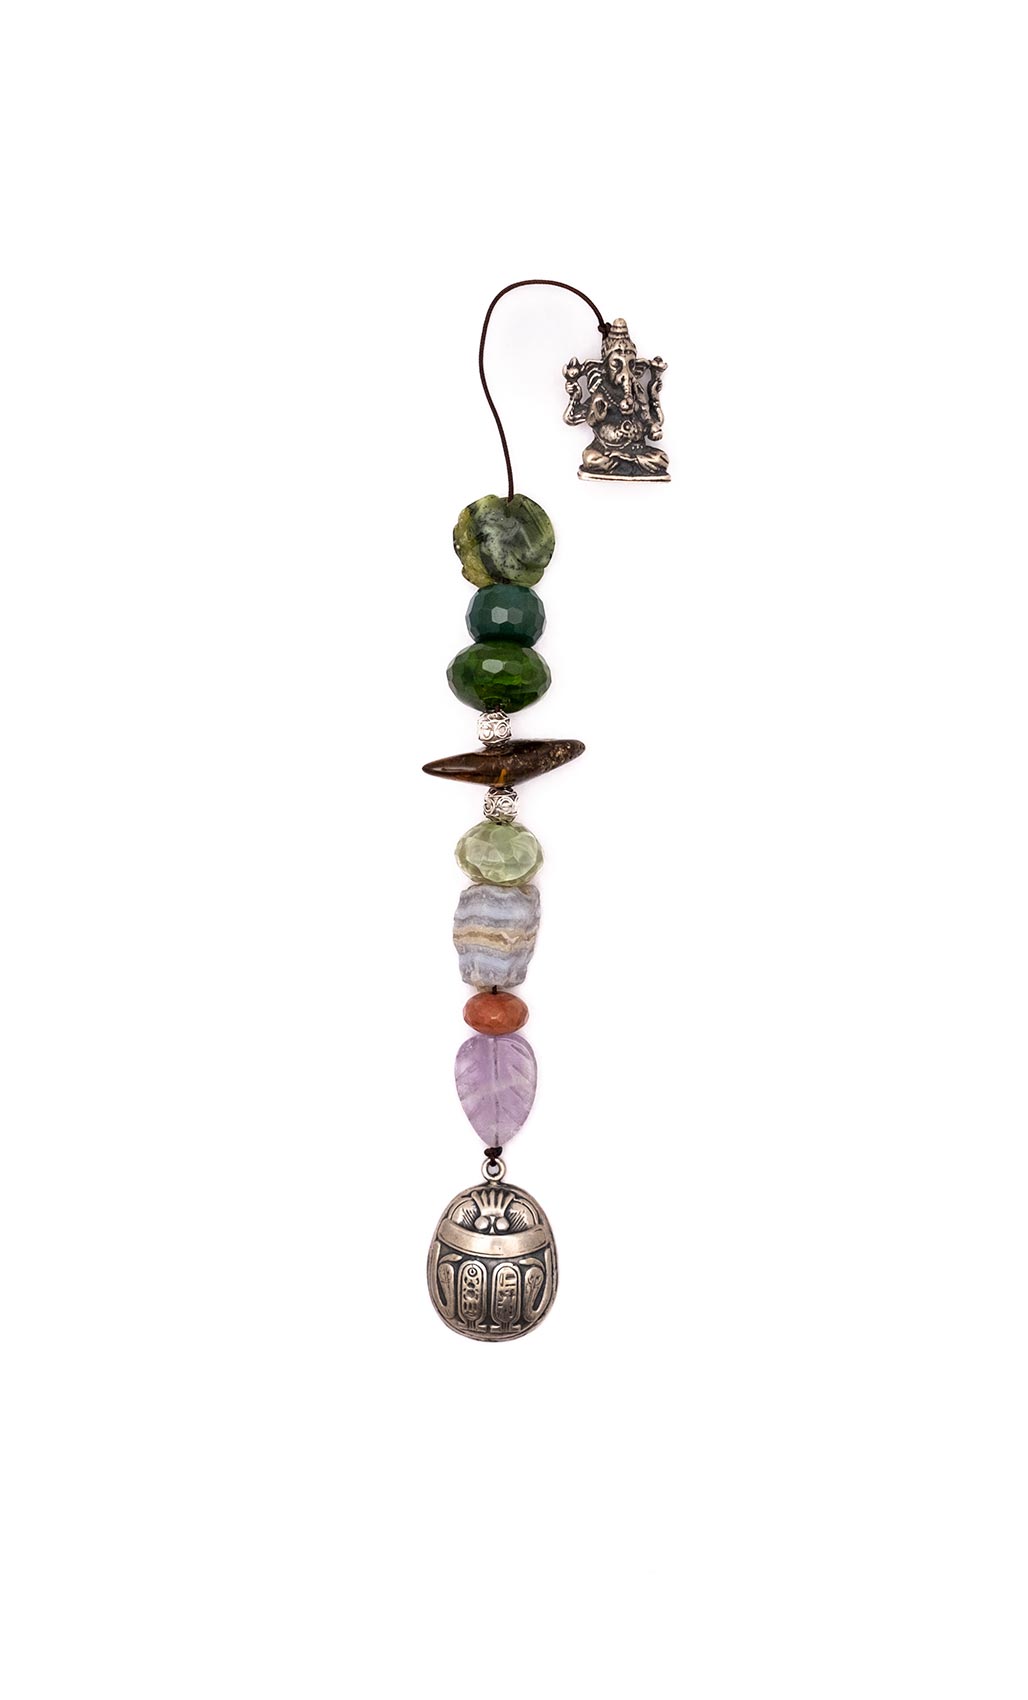 Egyptian Scarab and ganesha : for good luck, Wisdom, prosperity - protection for new beginnings. Amulet made of Semi-Precious Stones, Amber from baltic sea cut by hand, SILVER AND tin.